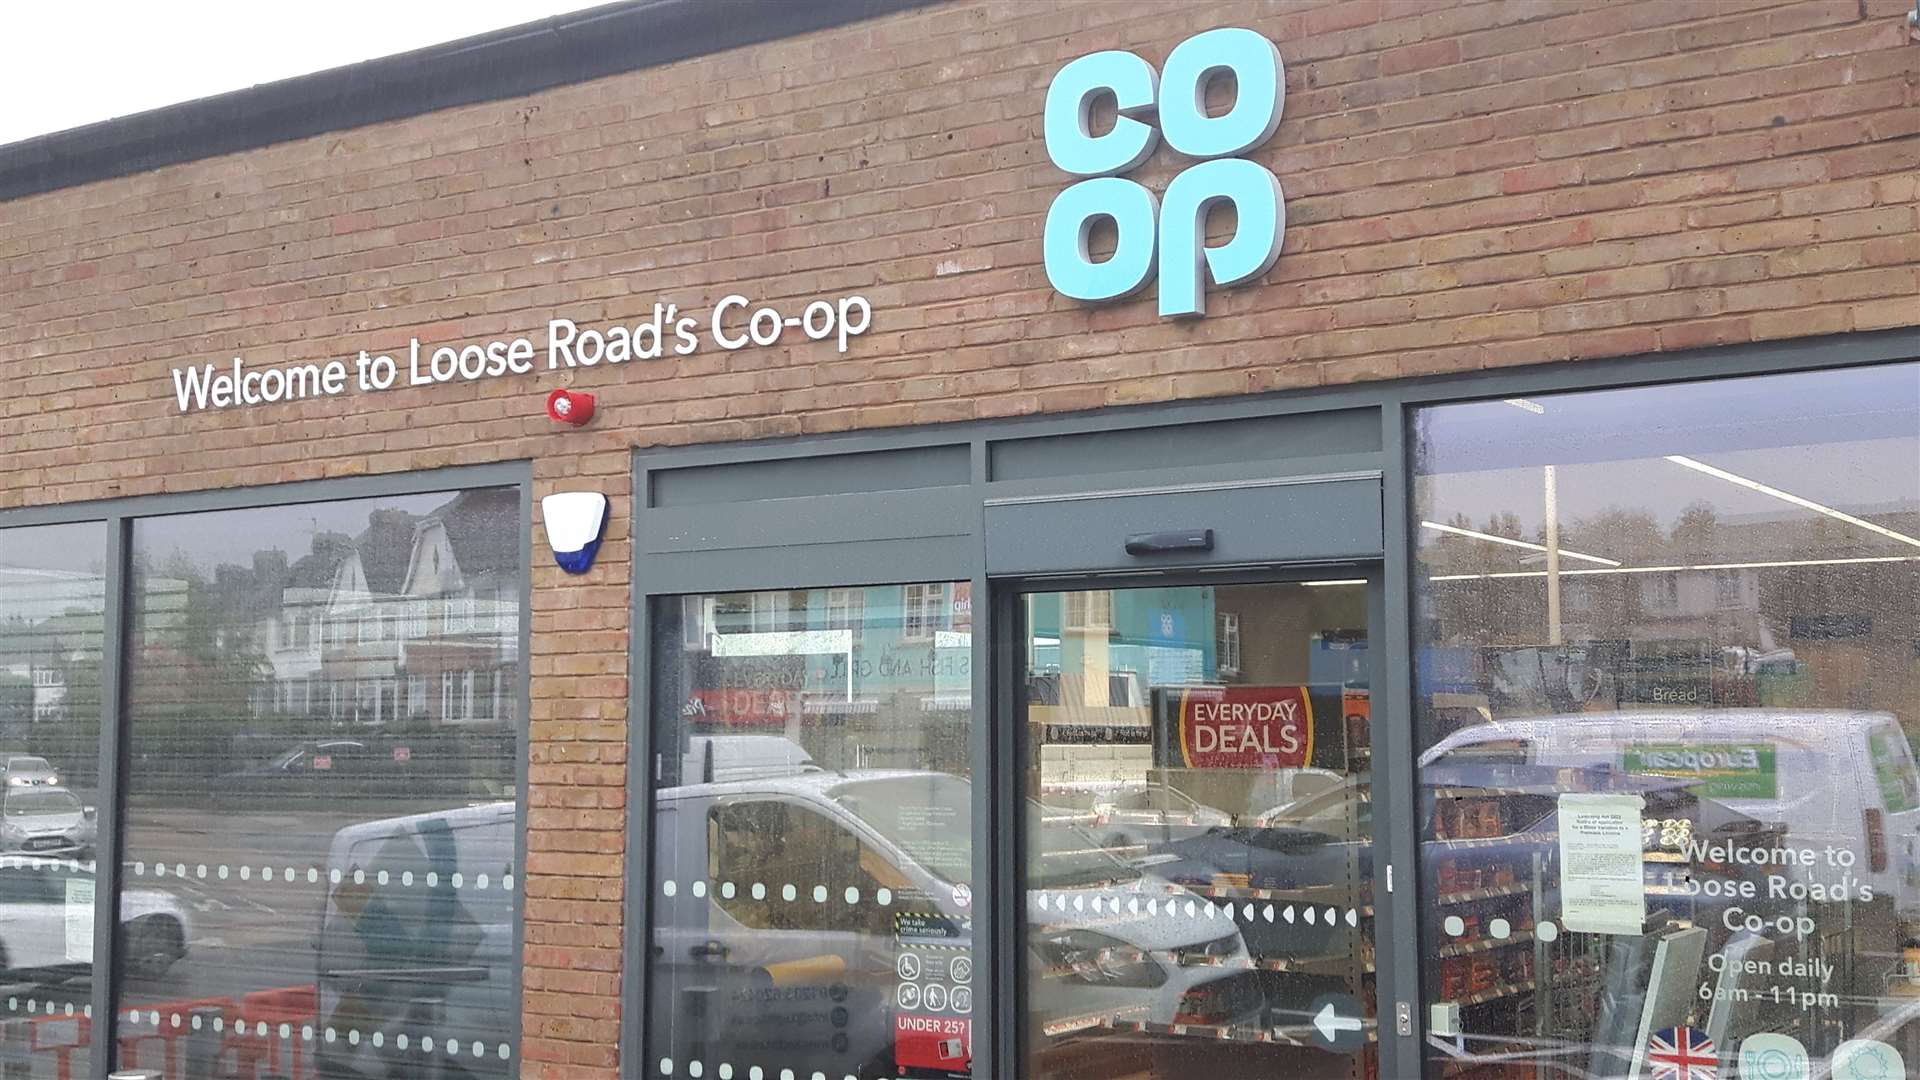 One investigation has seen a man charged with theft from a Co-op in Loose Road